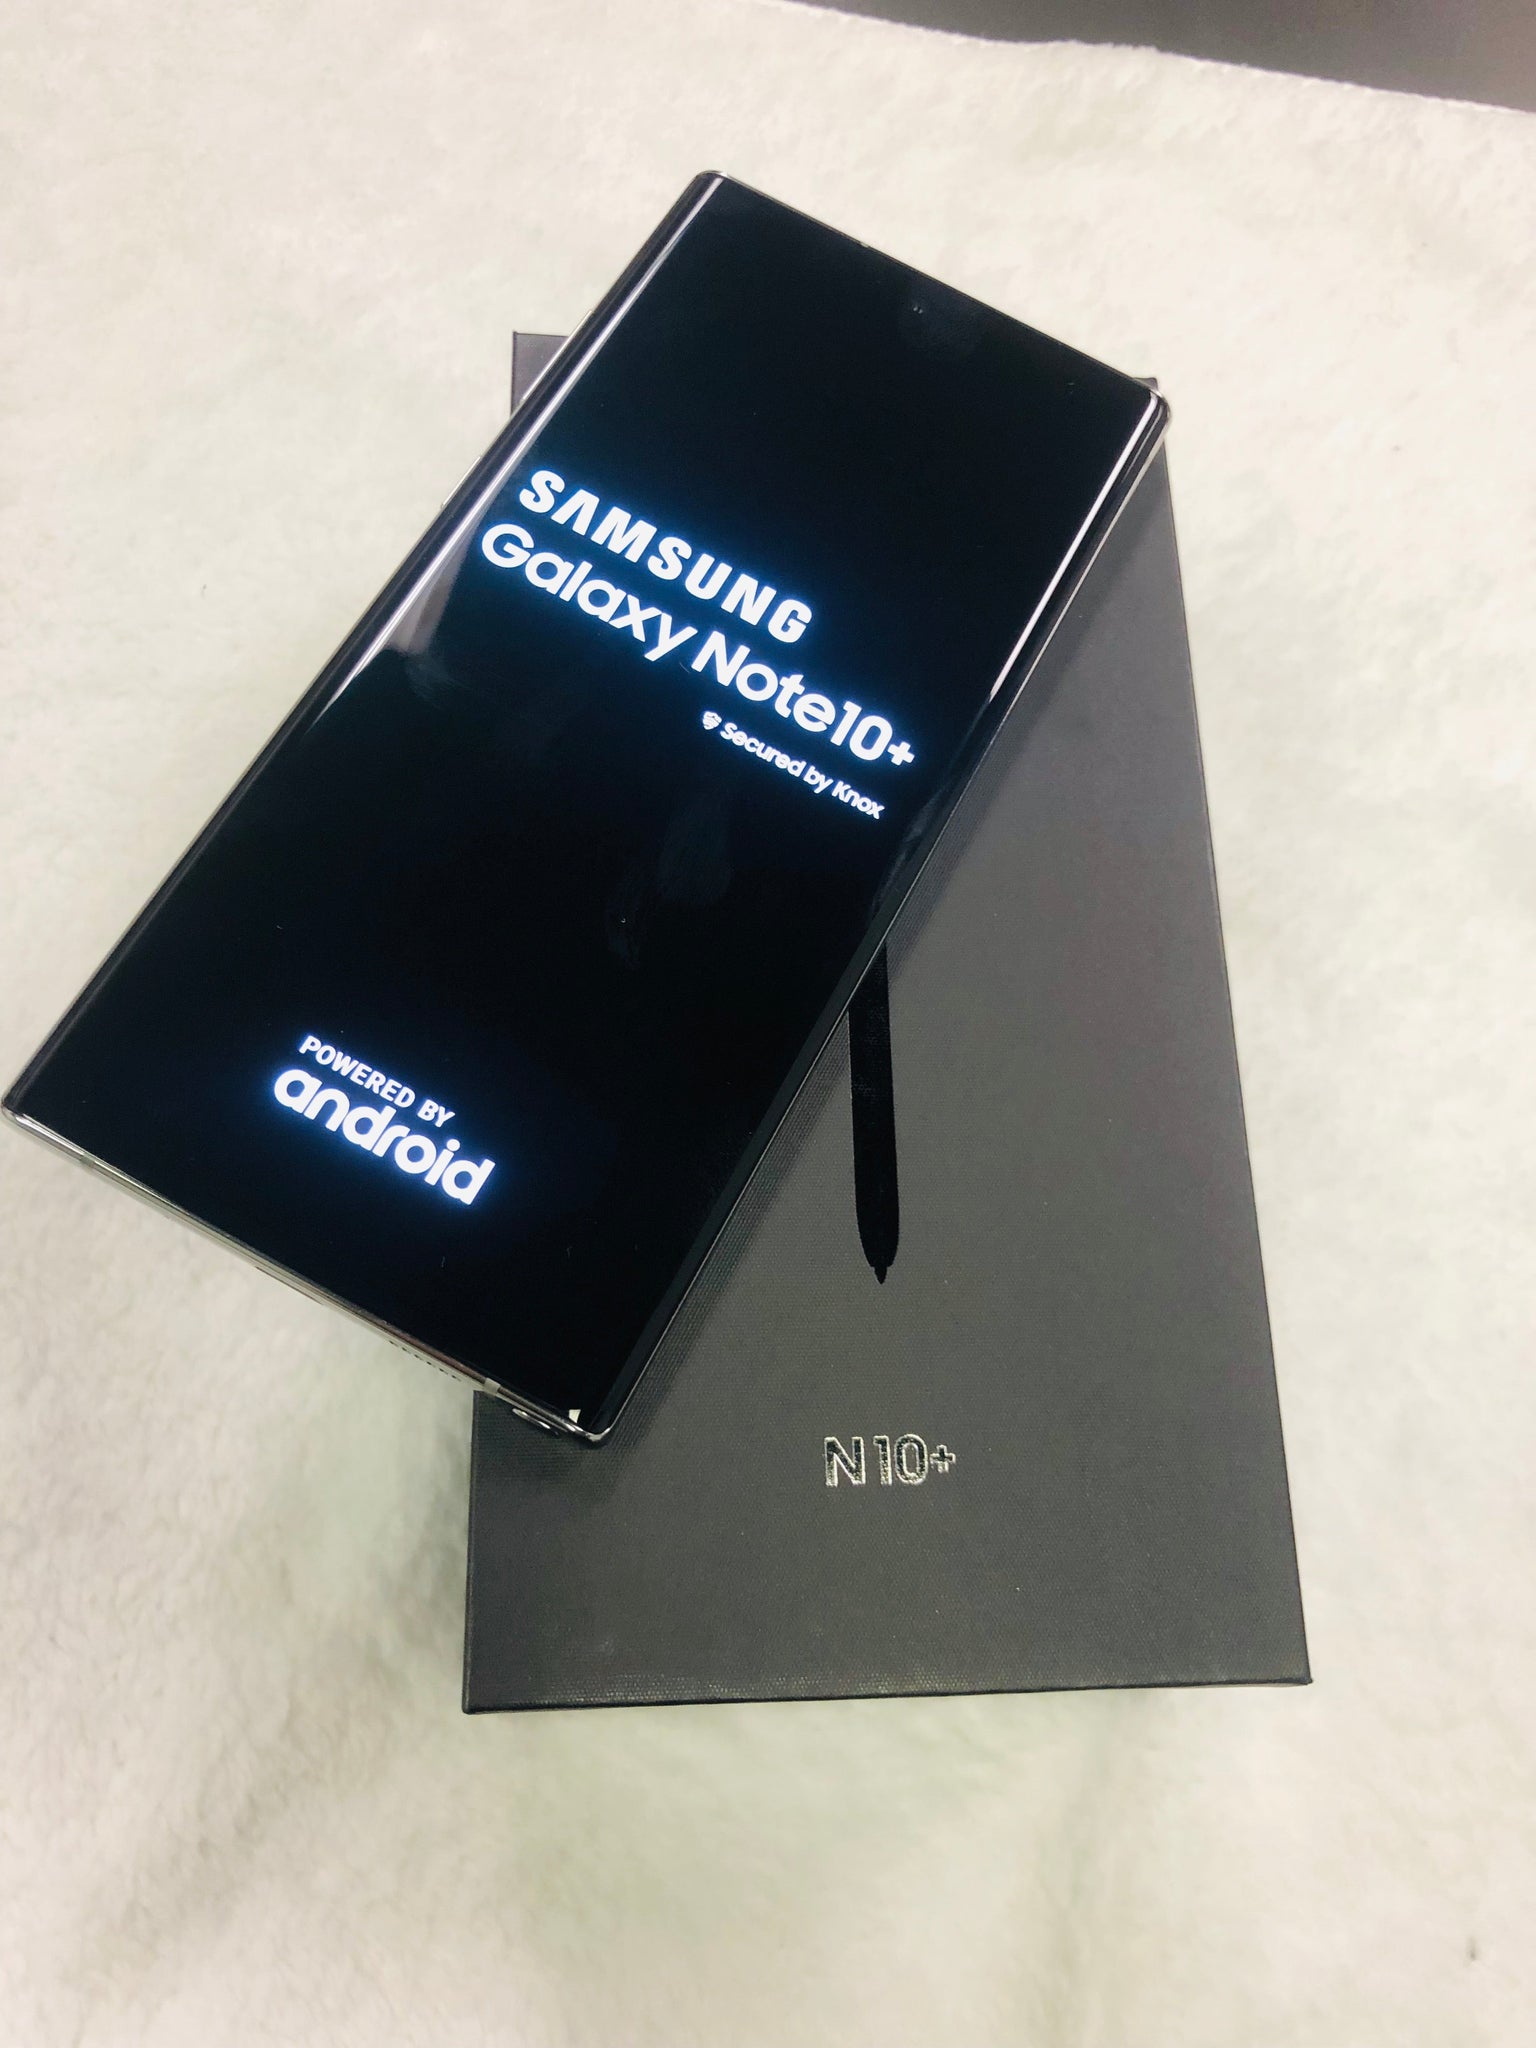 Brand New Samsung Galaxy Note 10 Plus 256GB Unlocked (Finance for as little as $50 down) - SaveOnCellz